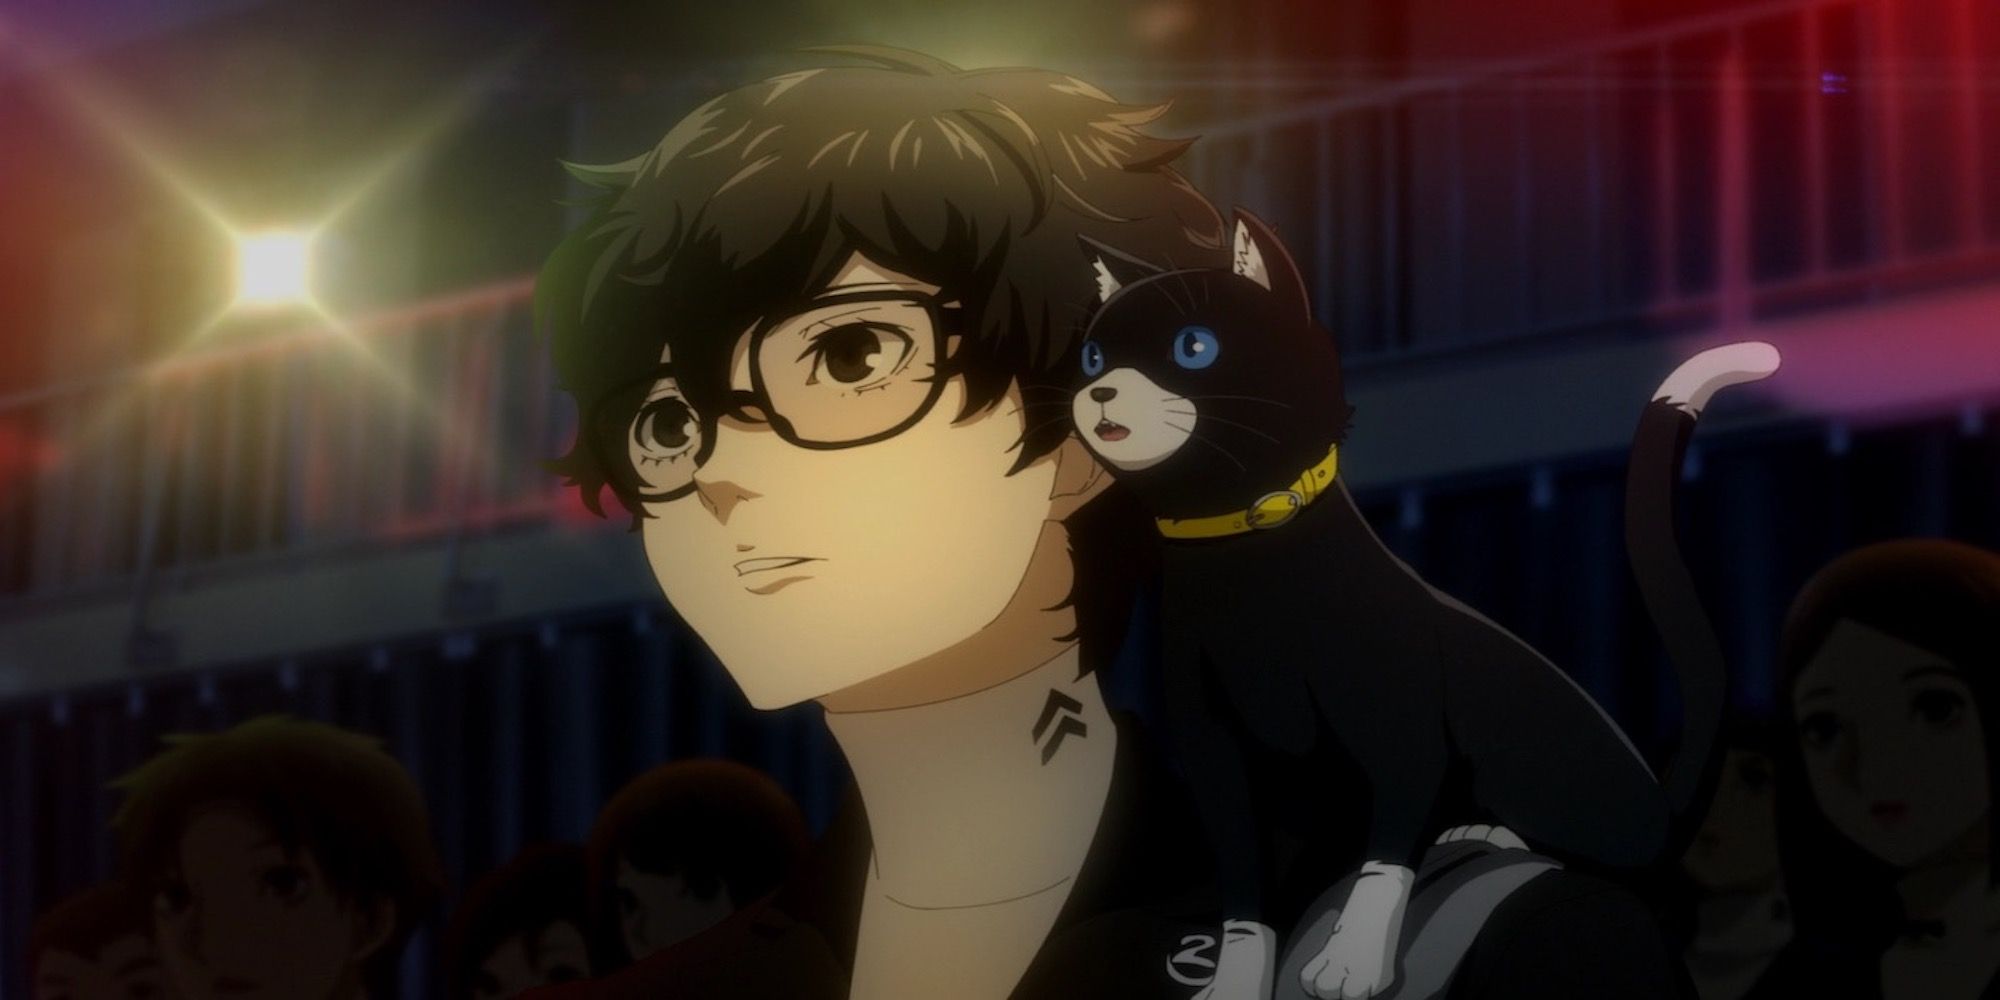 The main character and Morgana from Persona 5